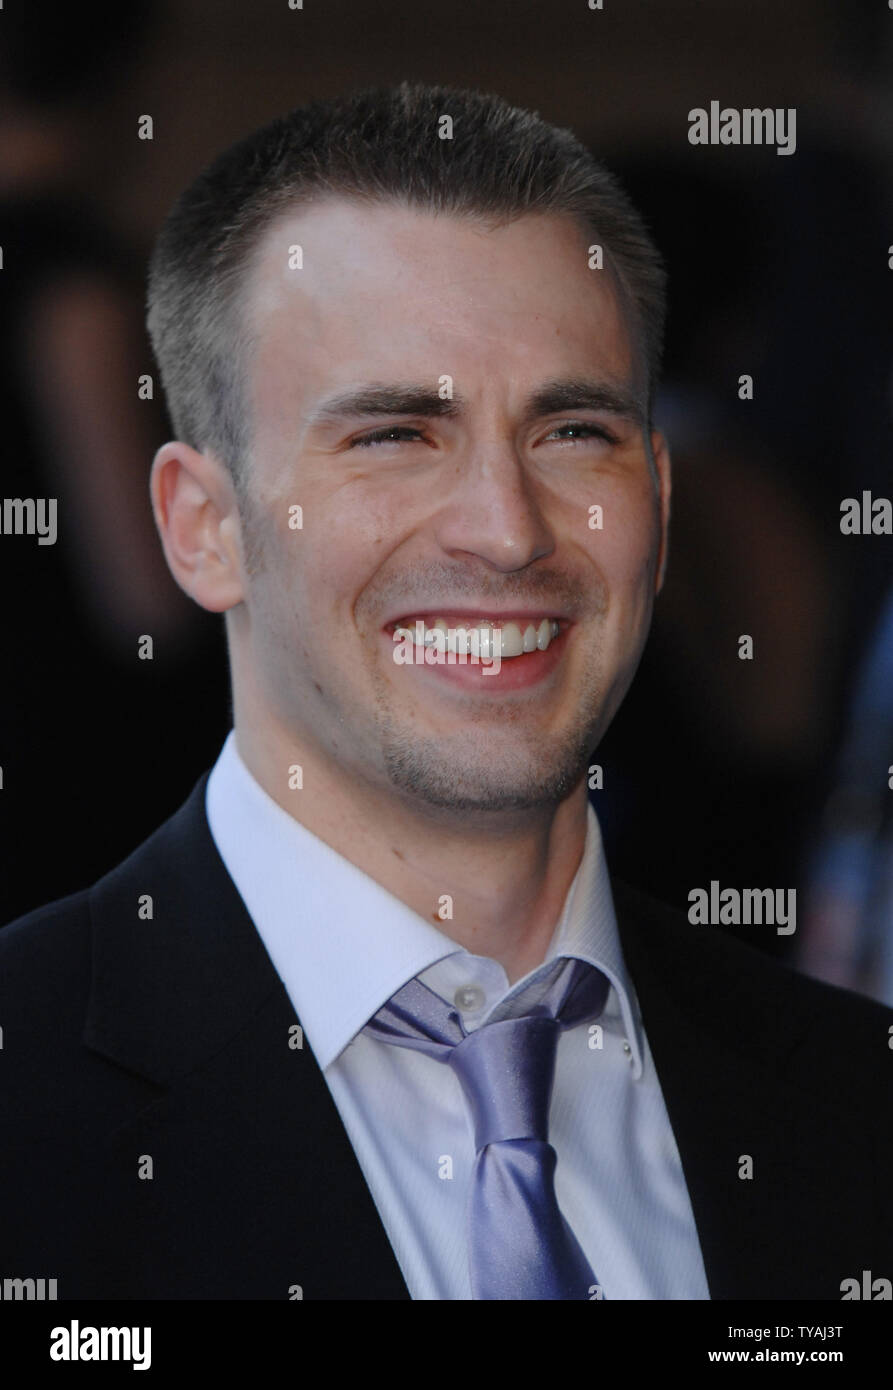 American actor Chris Evans attends the premiere of 'Fantastic 4: Rise Of The Silver Surfer' at Vue, Leicester Square in London on June 12, 2007.  (UPI Photo/Rune Hellestad) Stock Photo